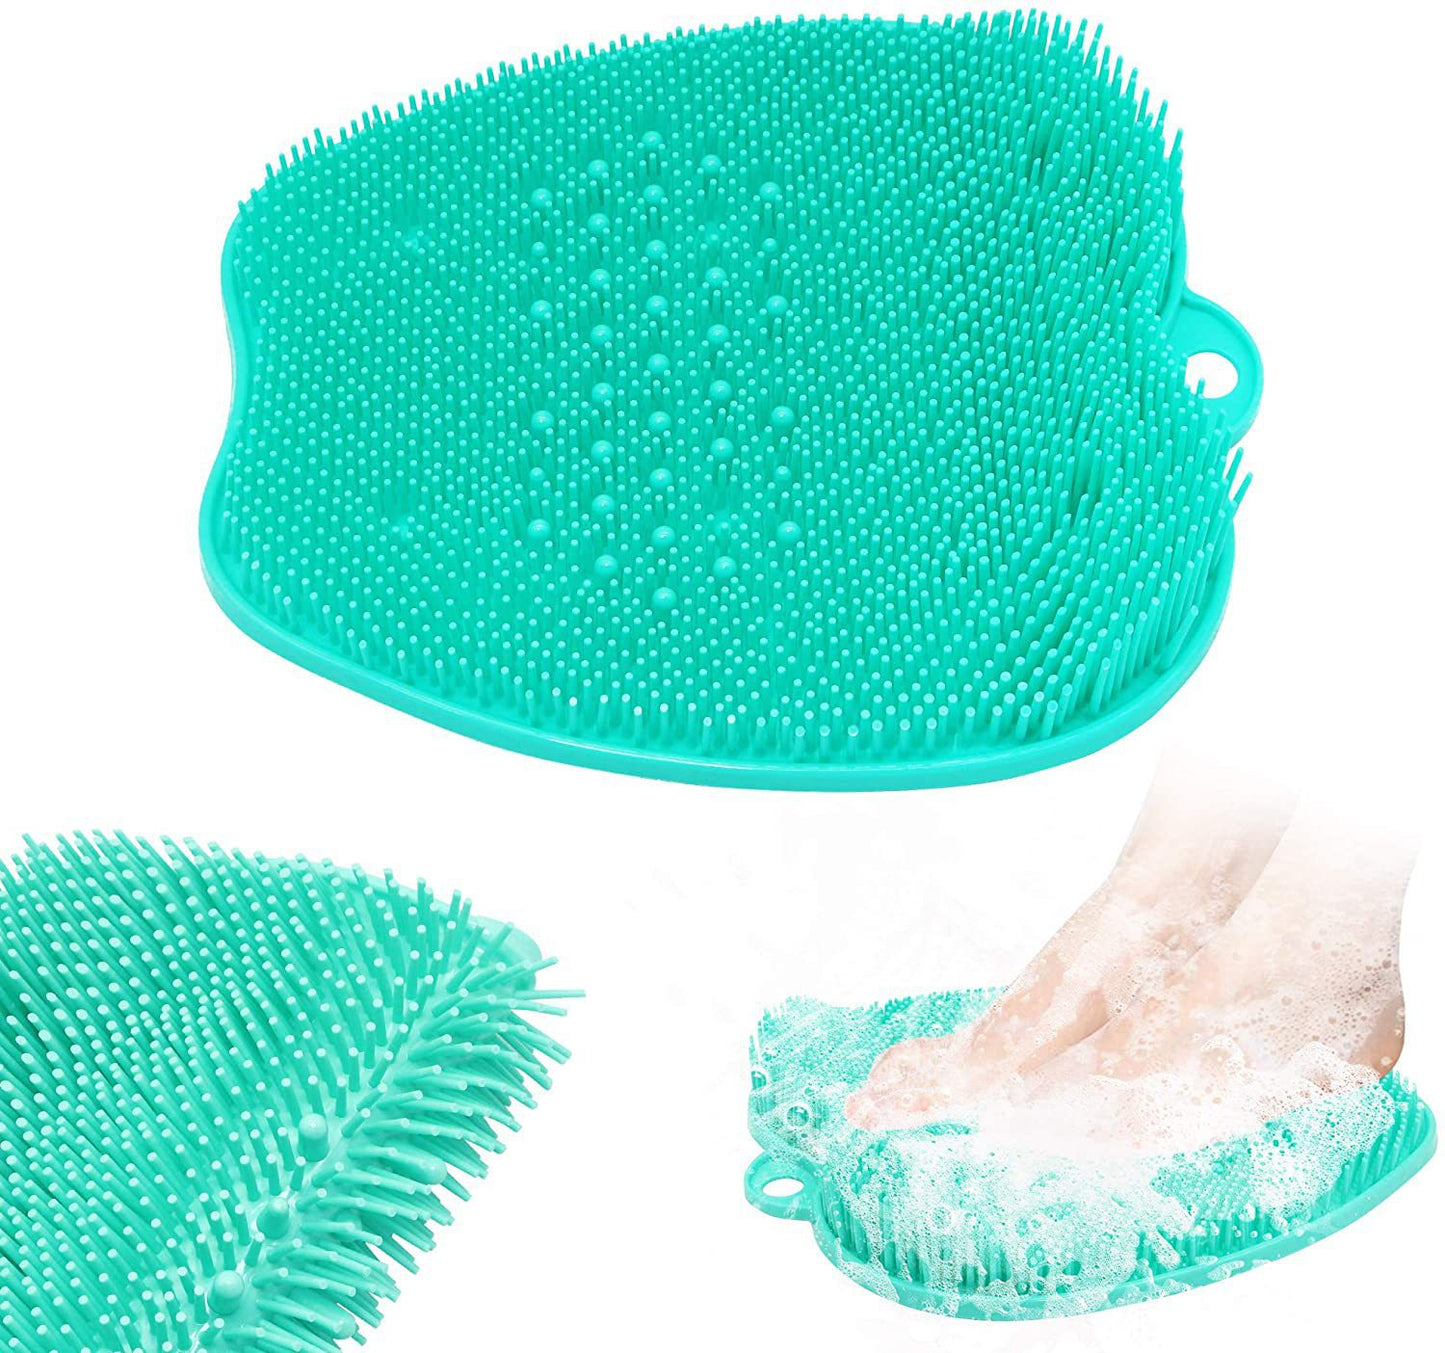 Importikaah-foot-scrubber-innovative-foot-hygiene-tool-designed-cleansing